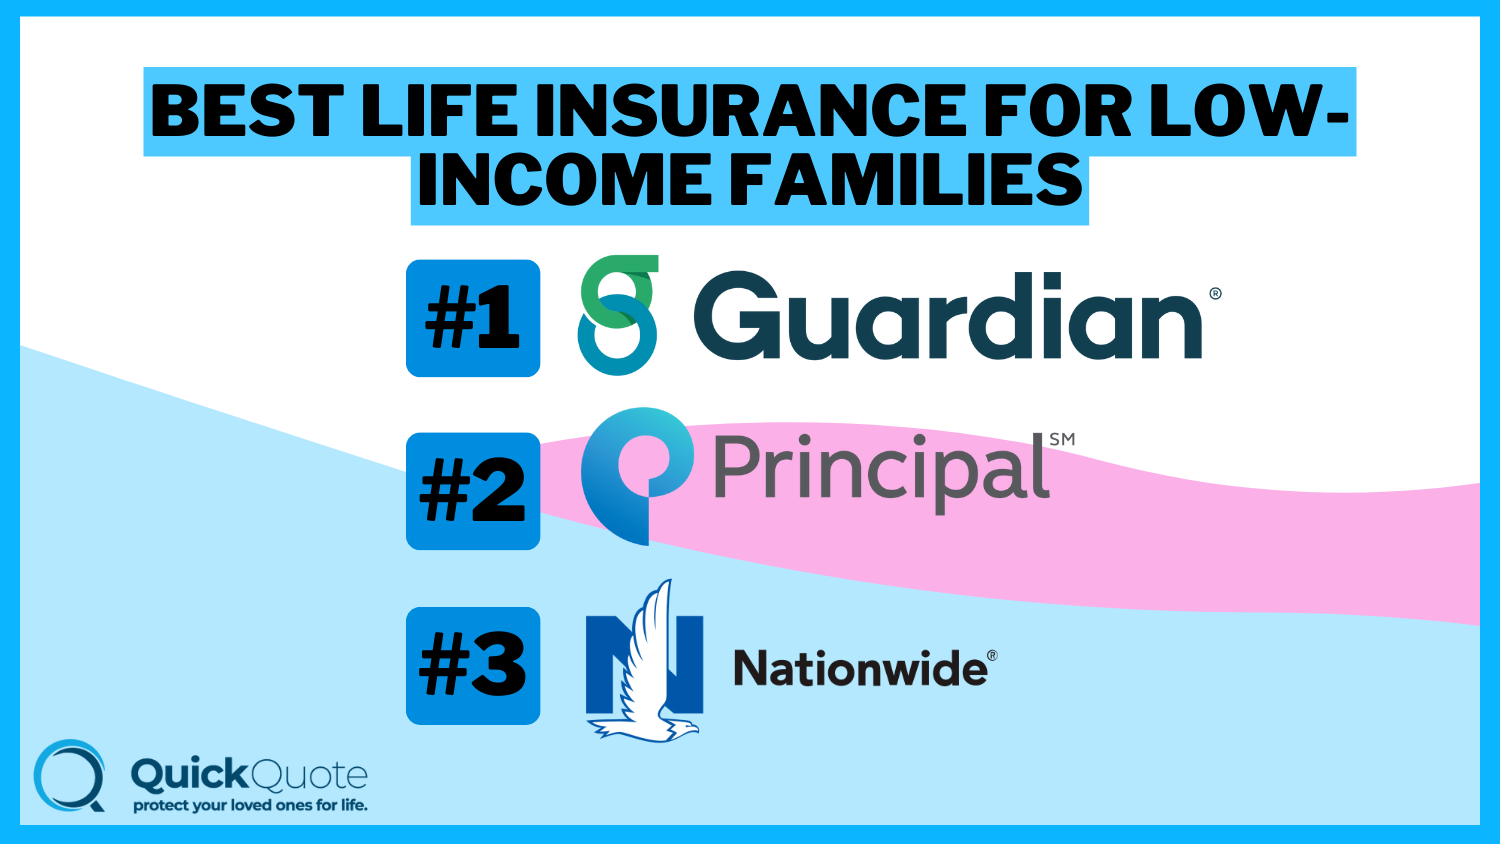 Best Life Insurance for Low-Income Families: Guardian, Principal, and Nationwide